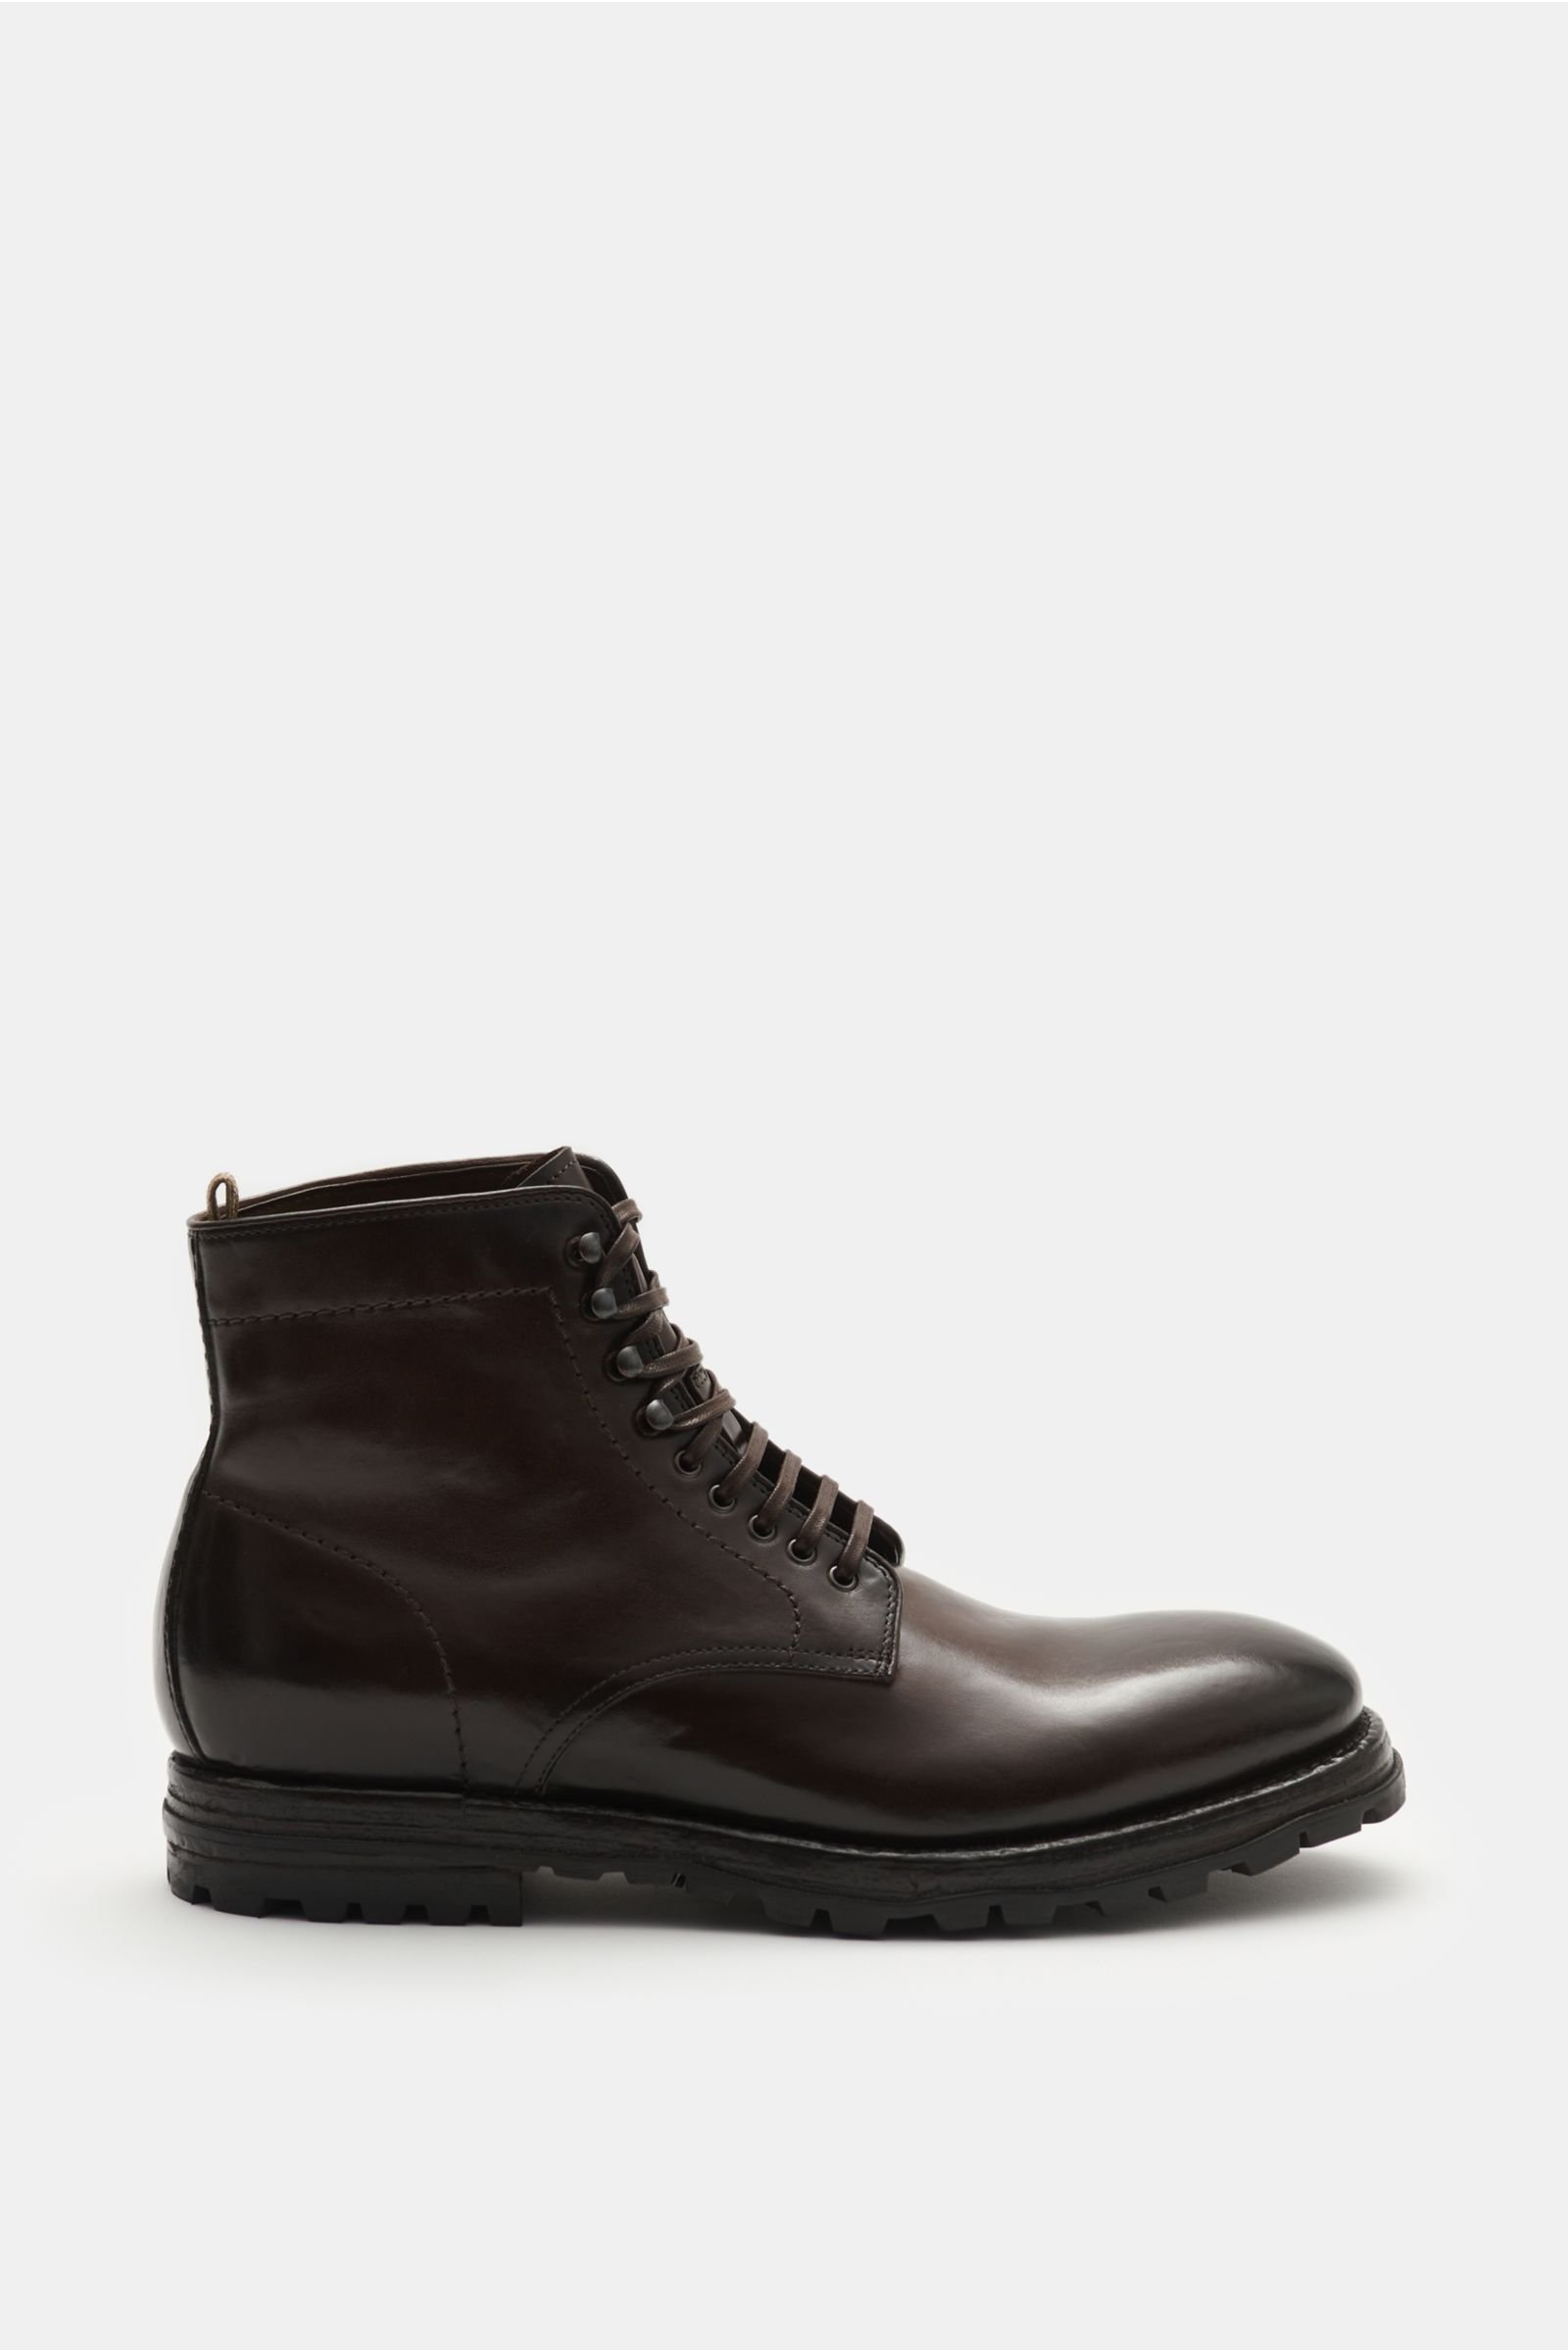 Lace-up boots 'Vail 002' dark brown